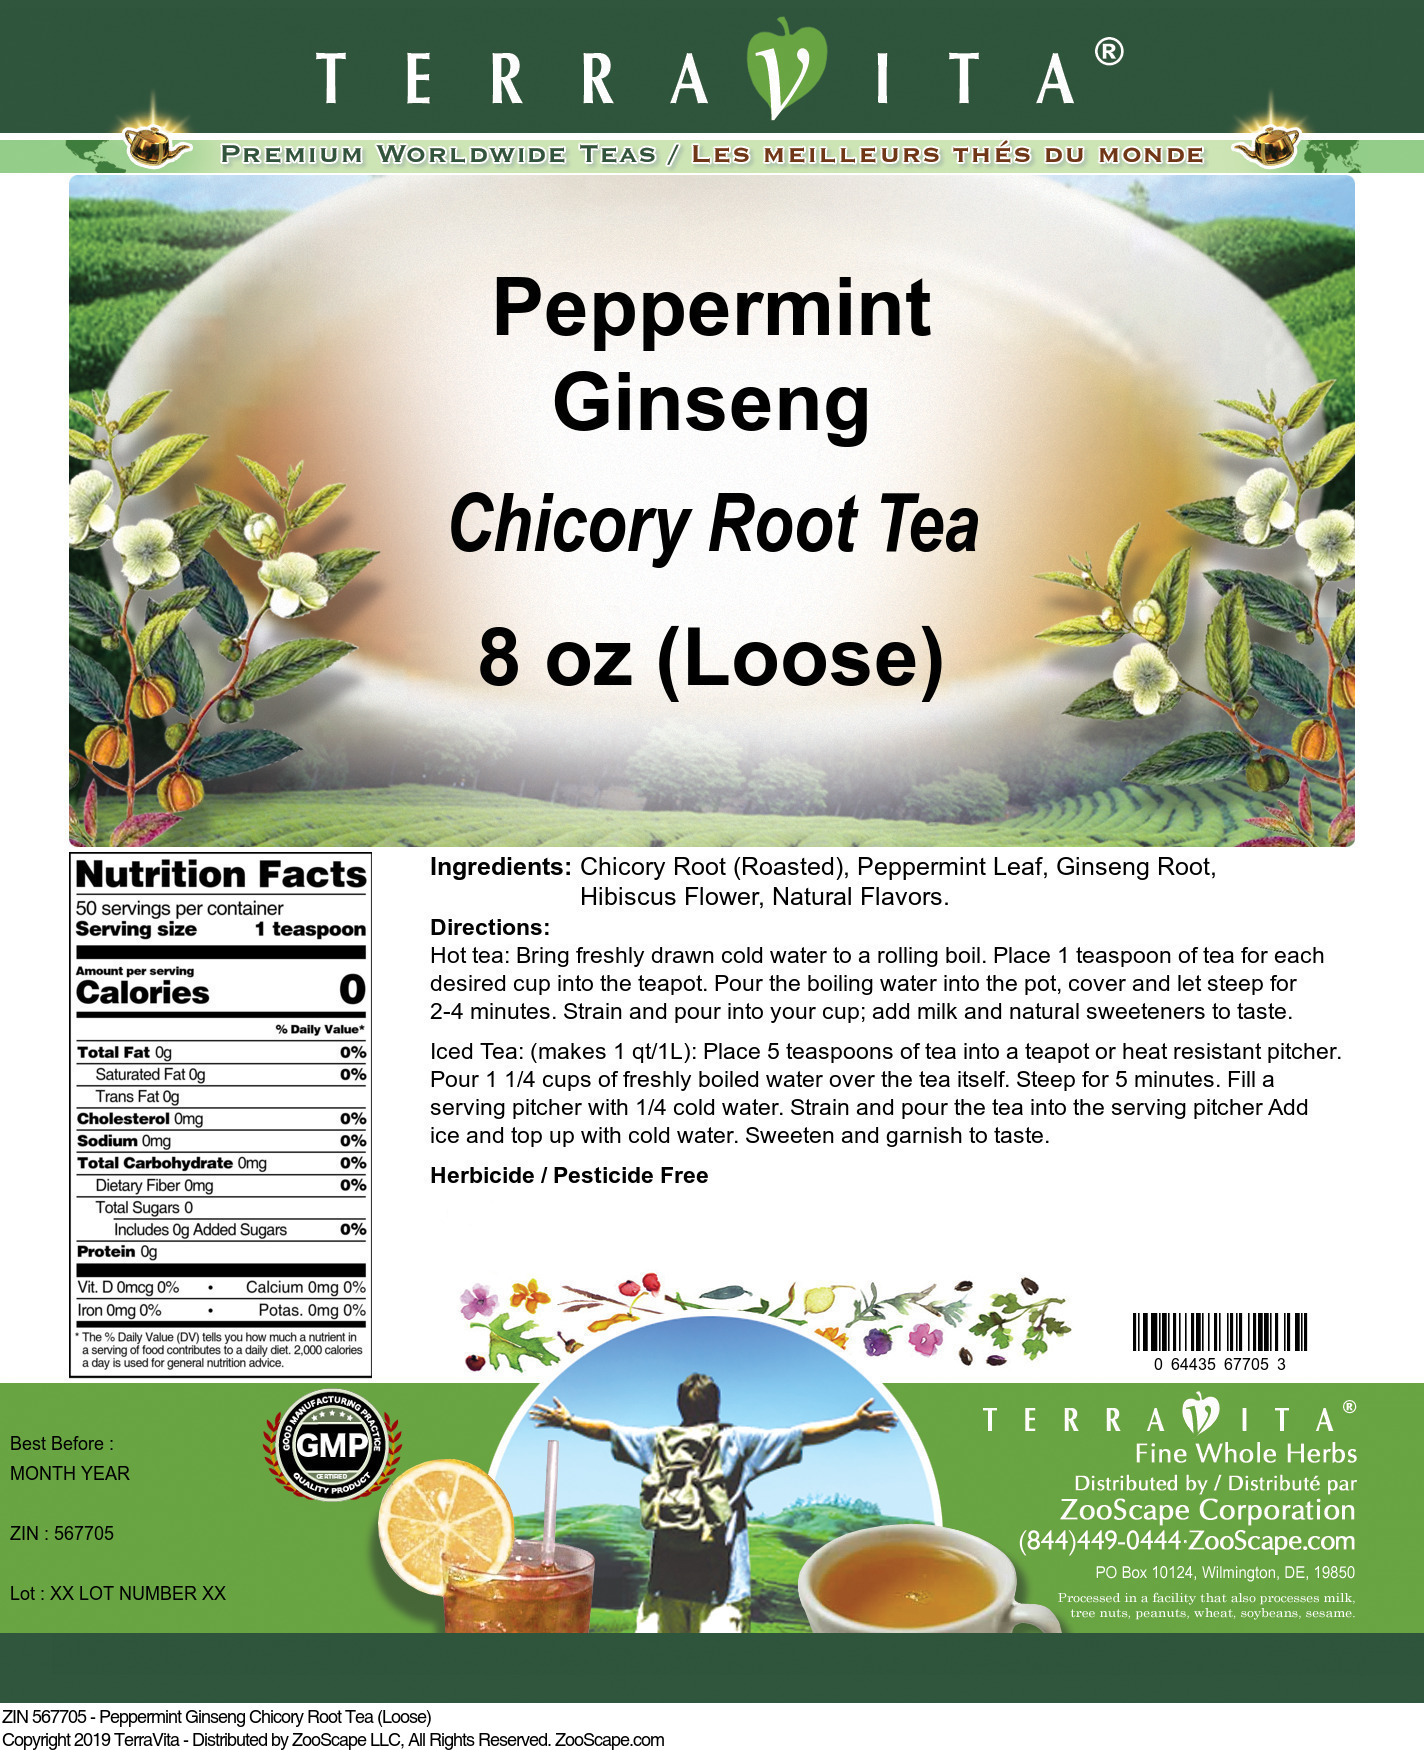 Peppermint Ginseng Chicory Root Tea (Loose) - Label